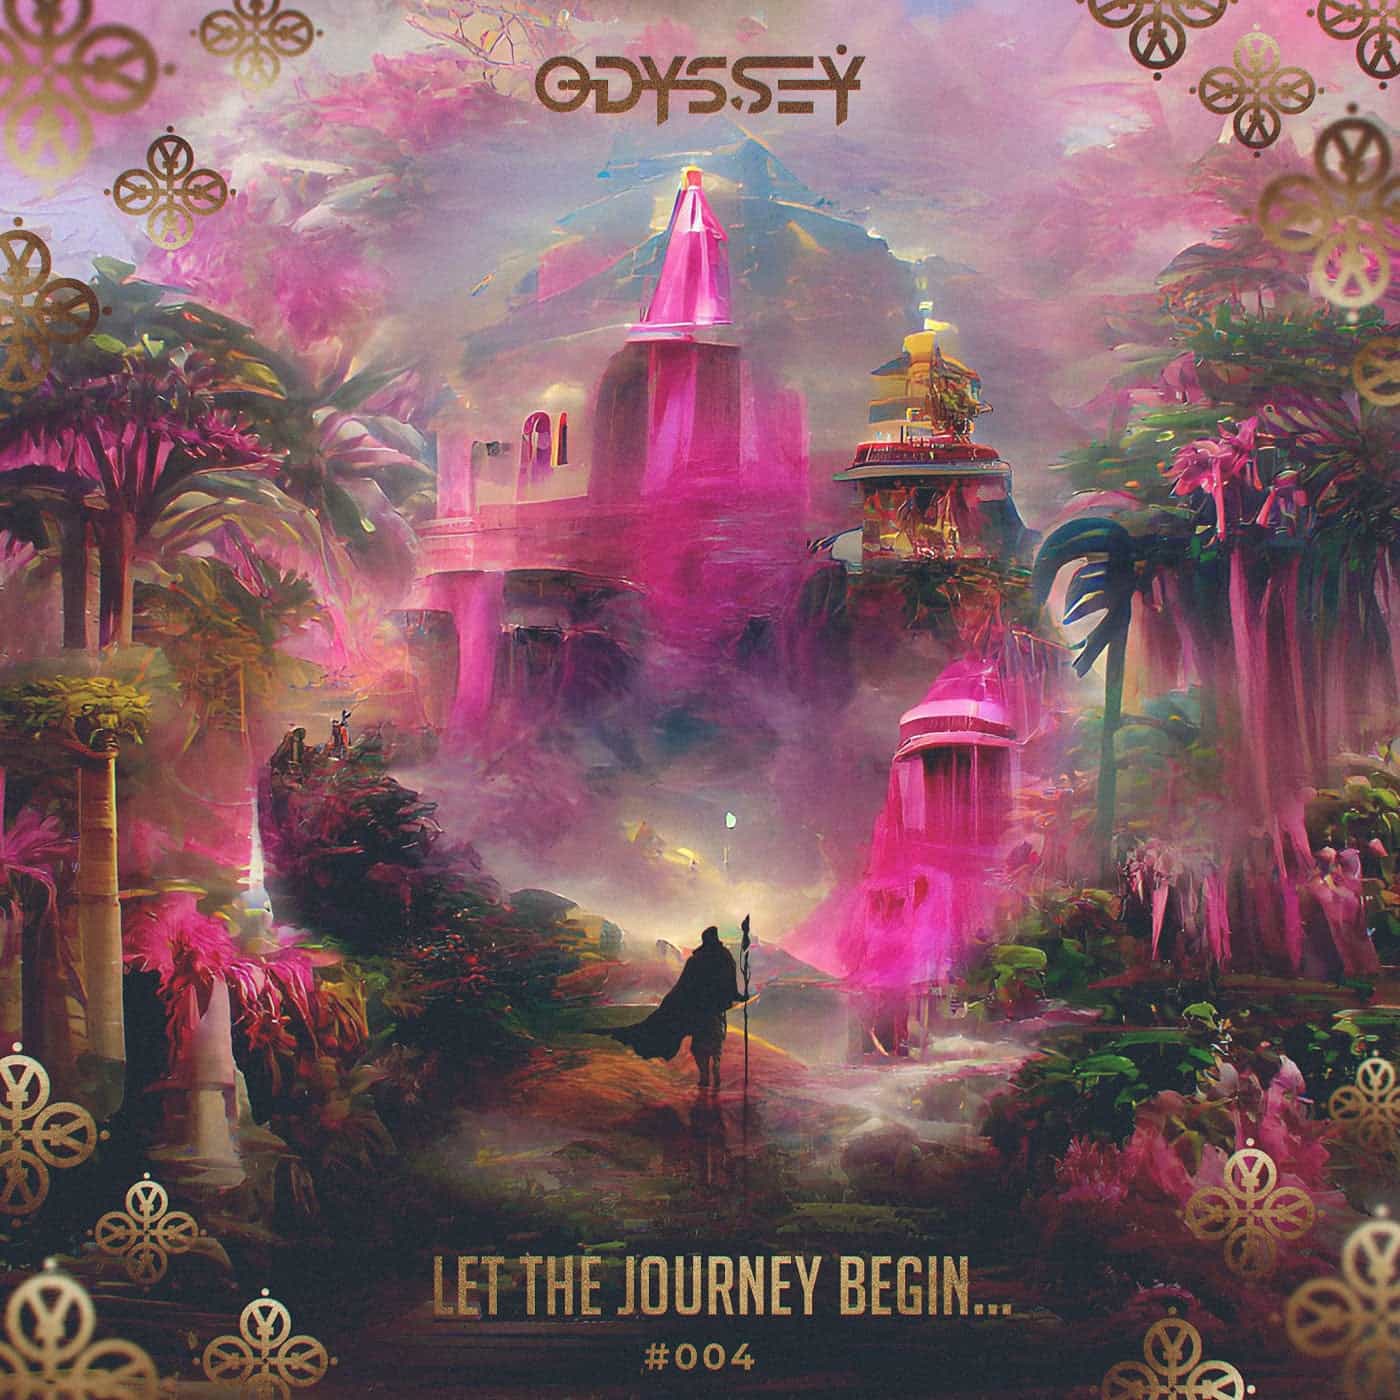 Download Odyssey: Let the journey begin #004 on Electrobuzz